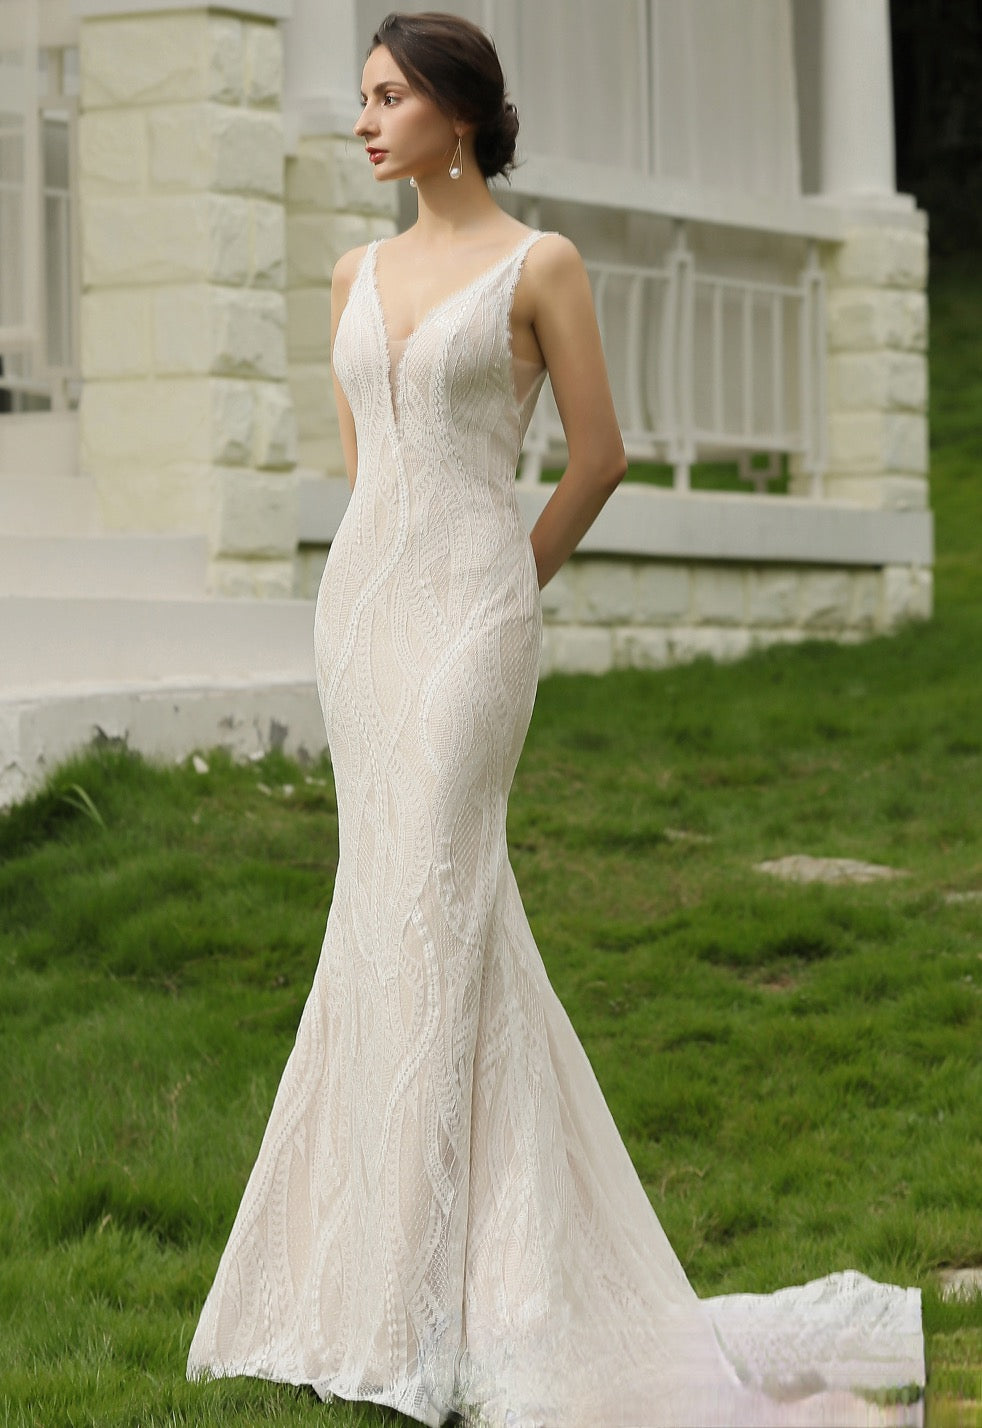 Slim and Sexy Wedding Gown With Illusion Back